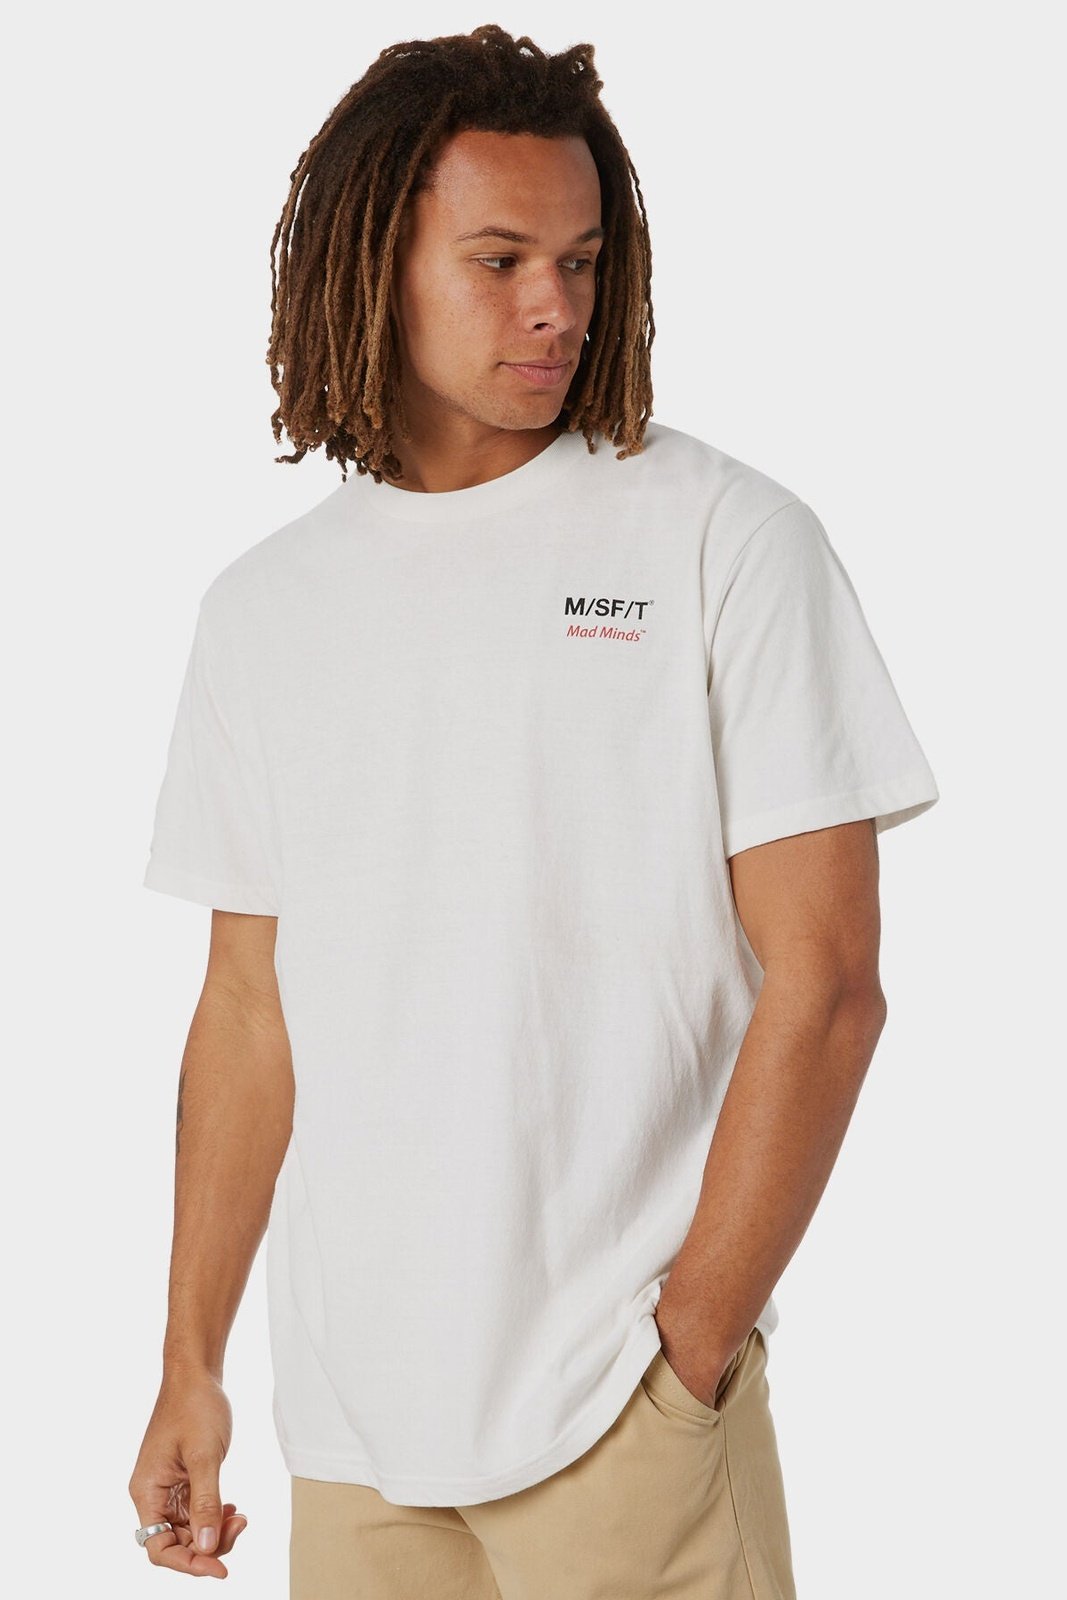 Misfit sonar eclipse 50/50 ss tee - washed white